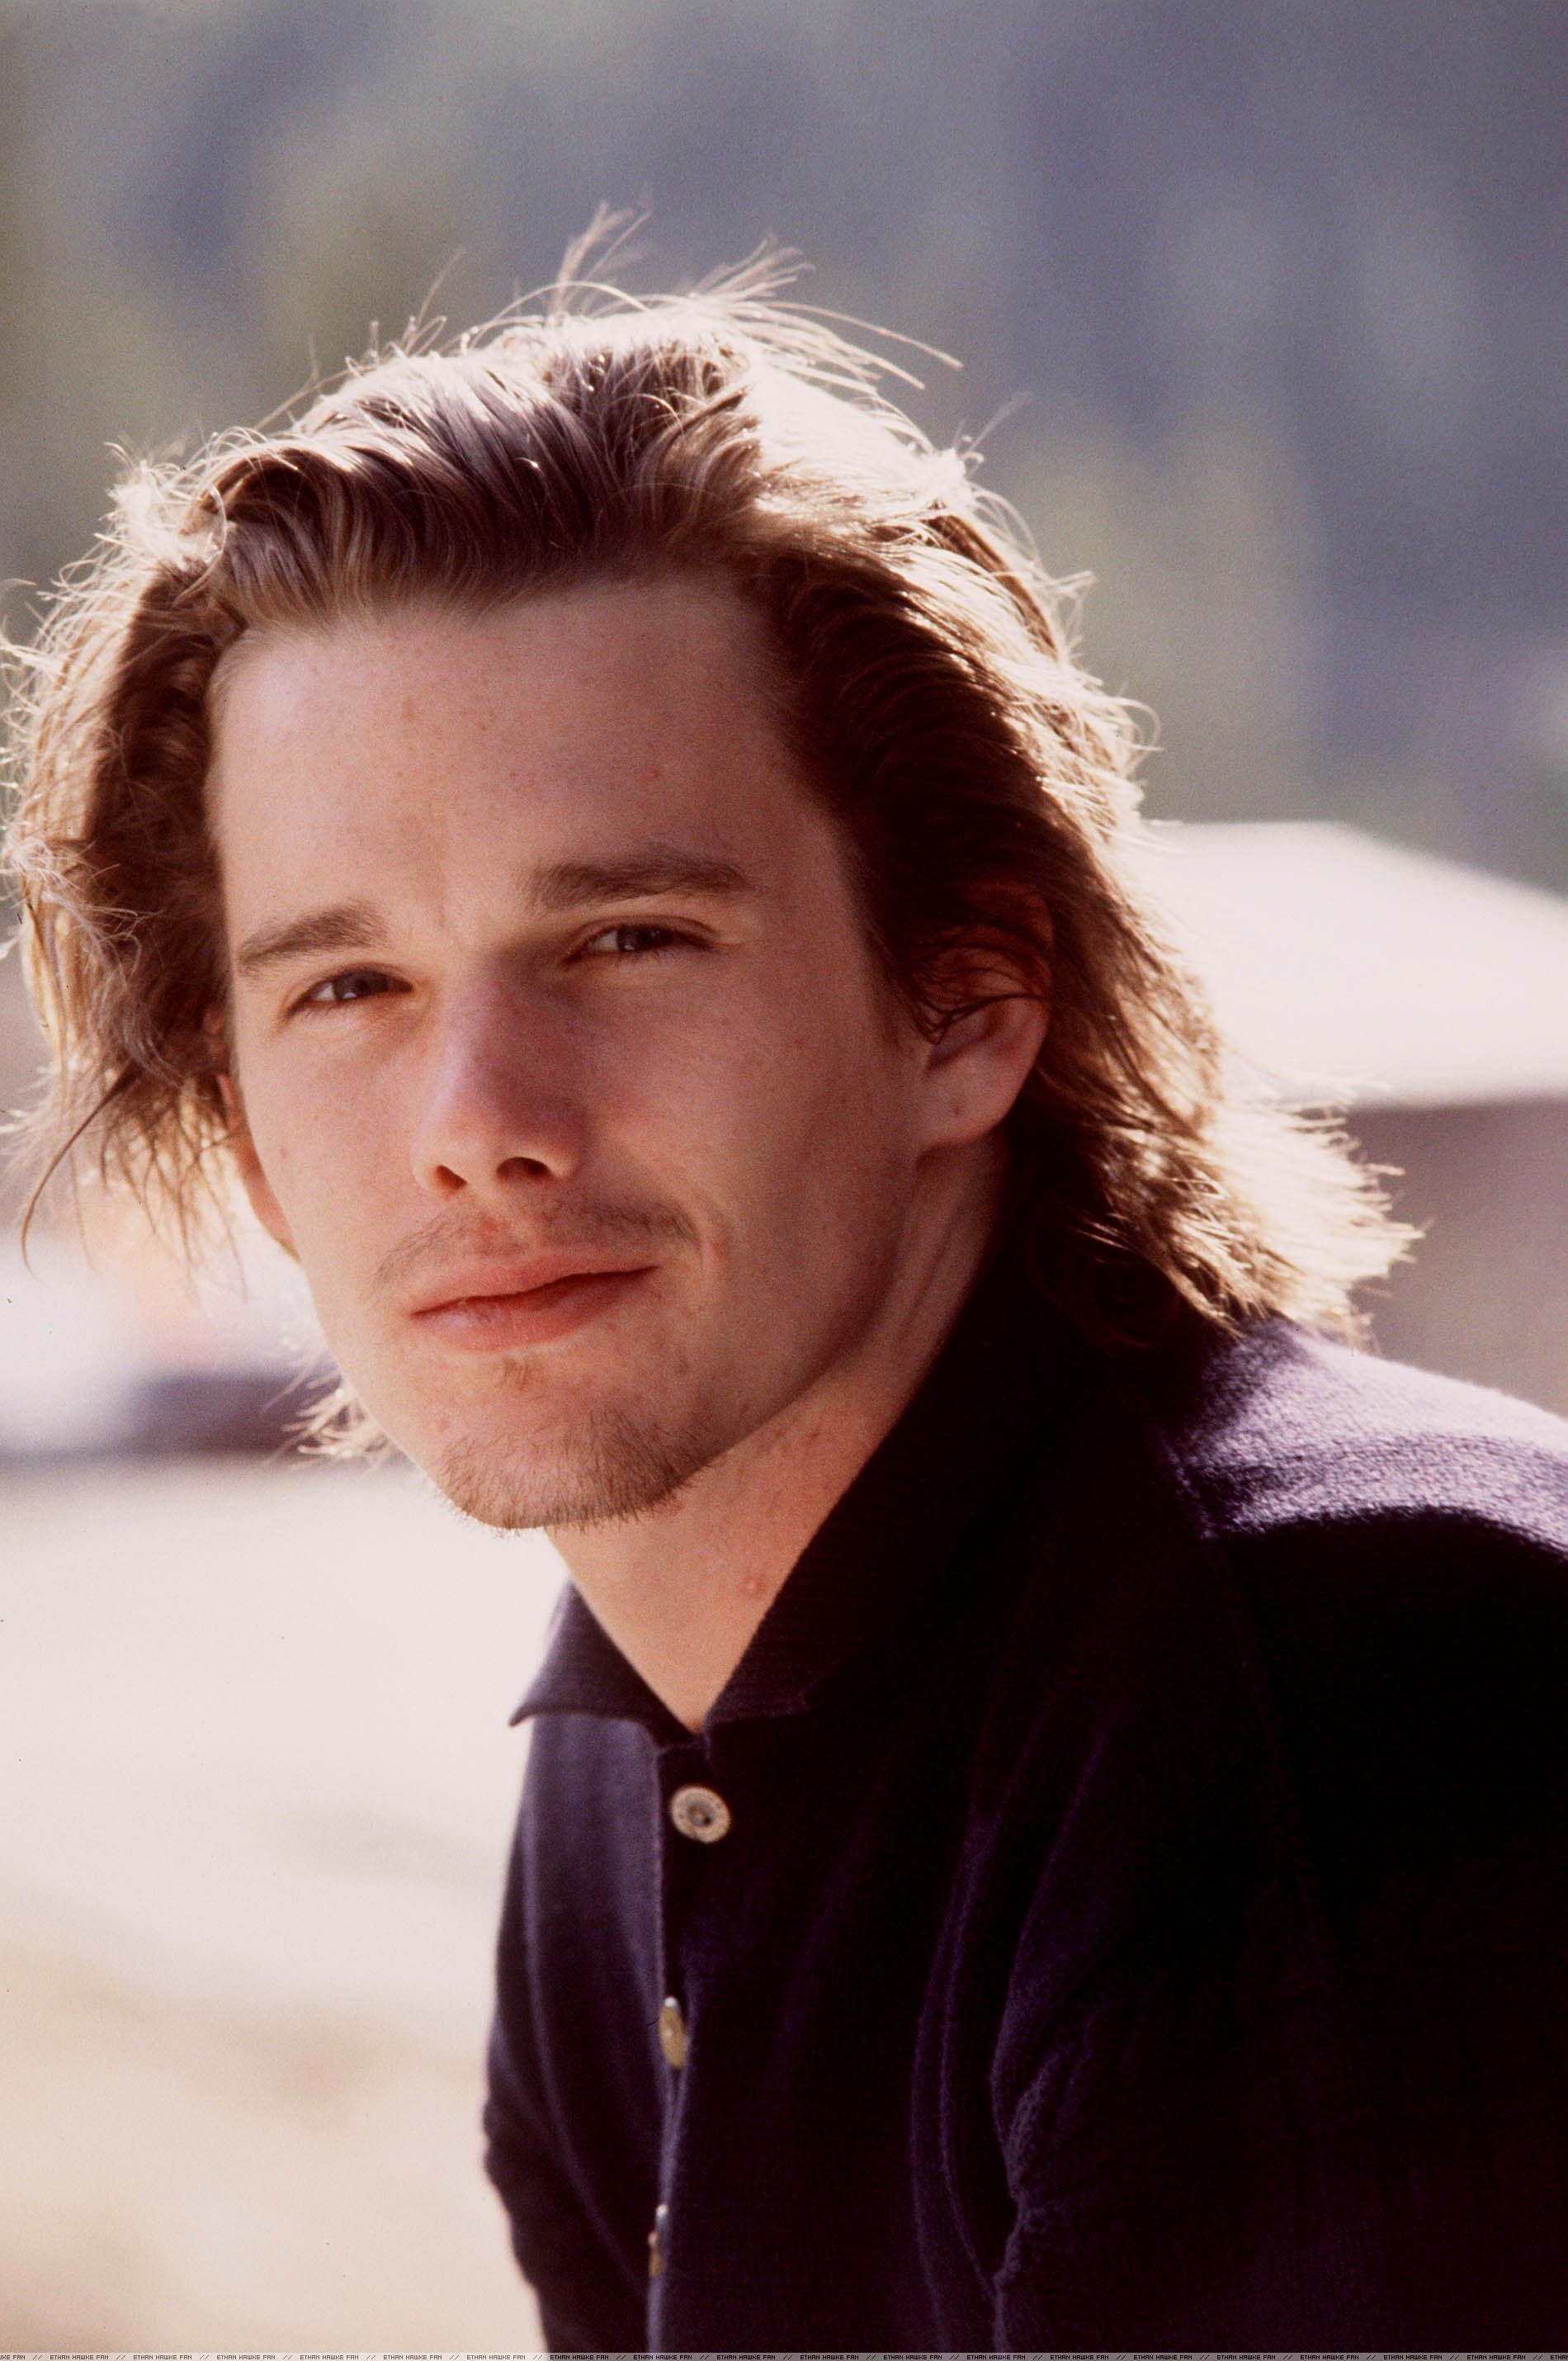 Ethan Hawke - Images Gallery